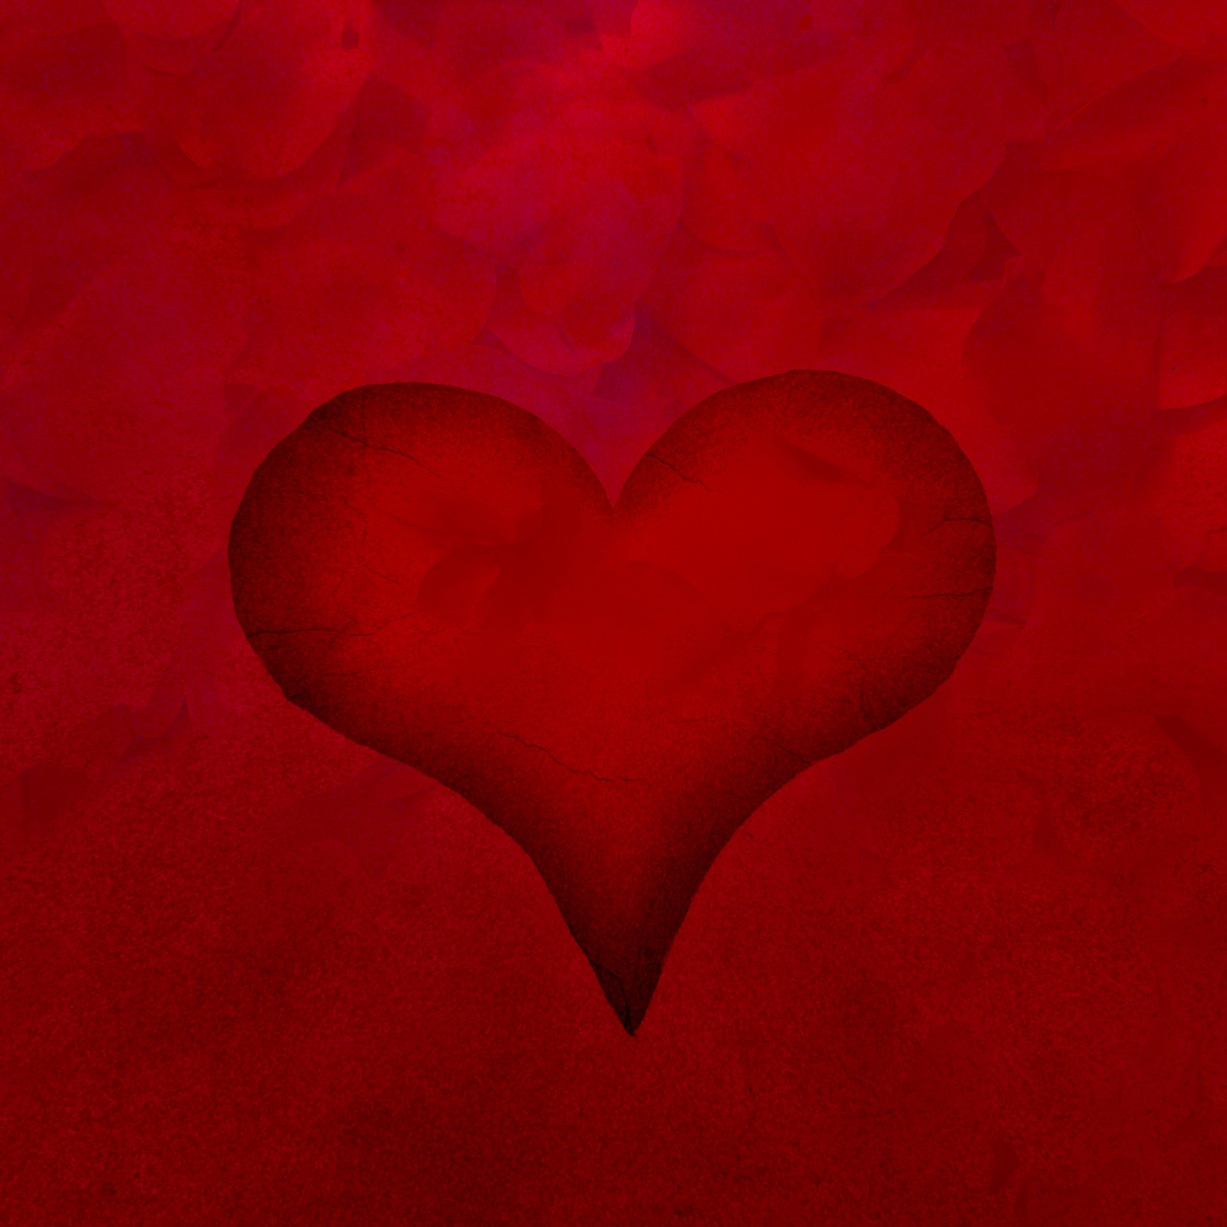 Red heart on a red background.